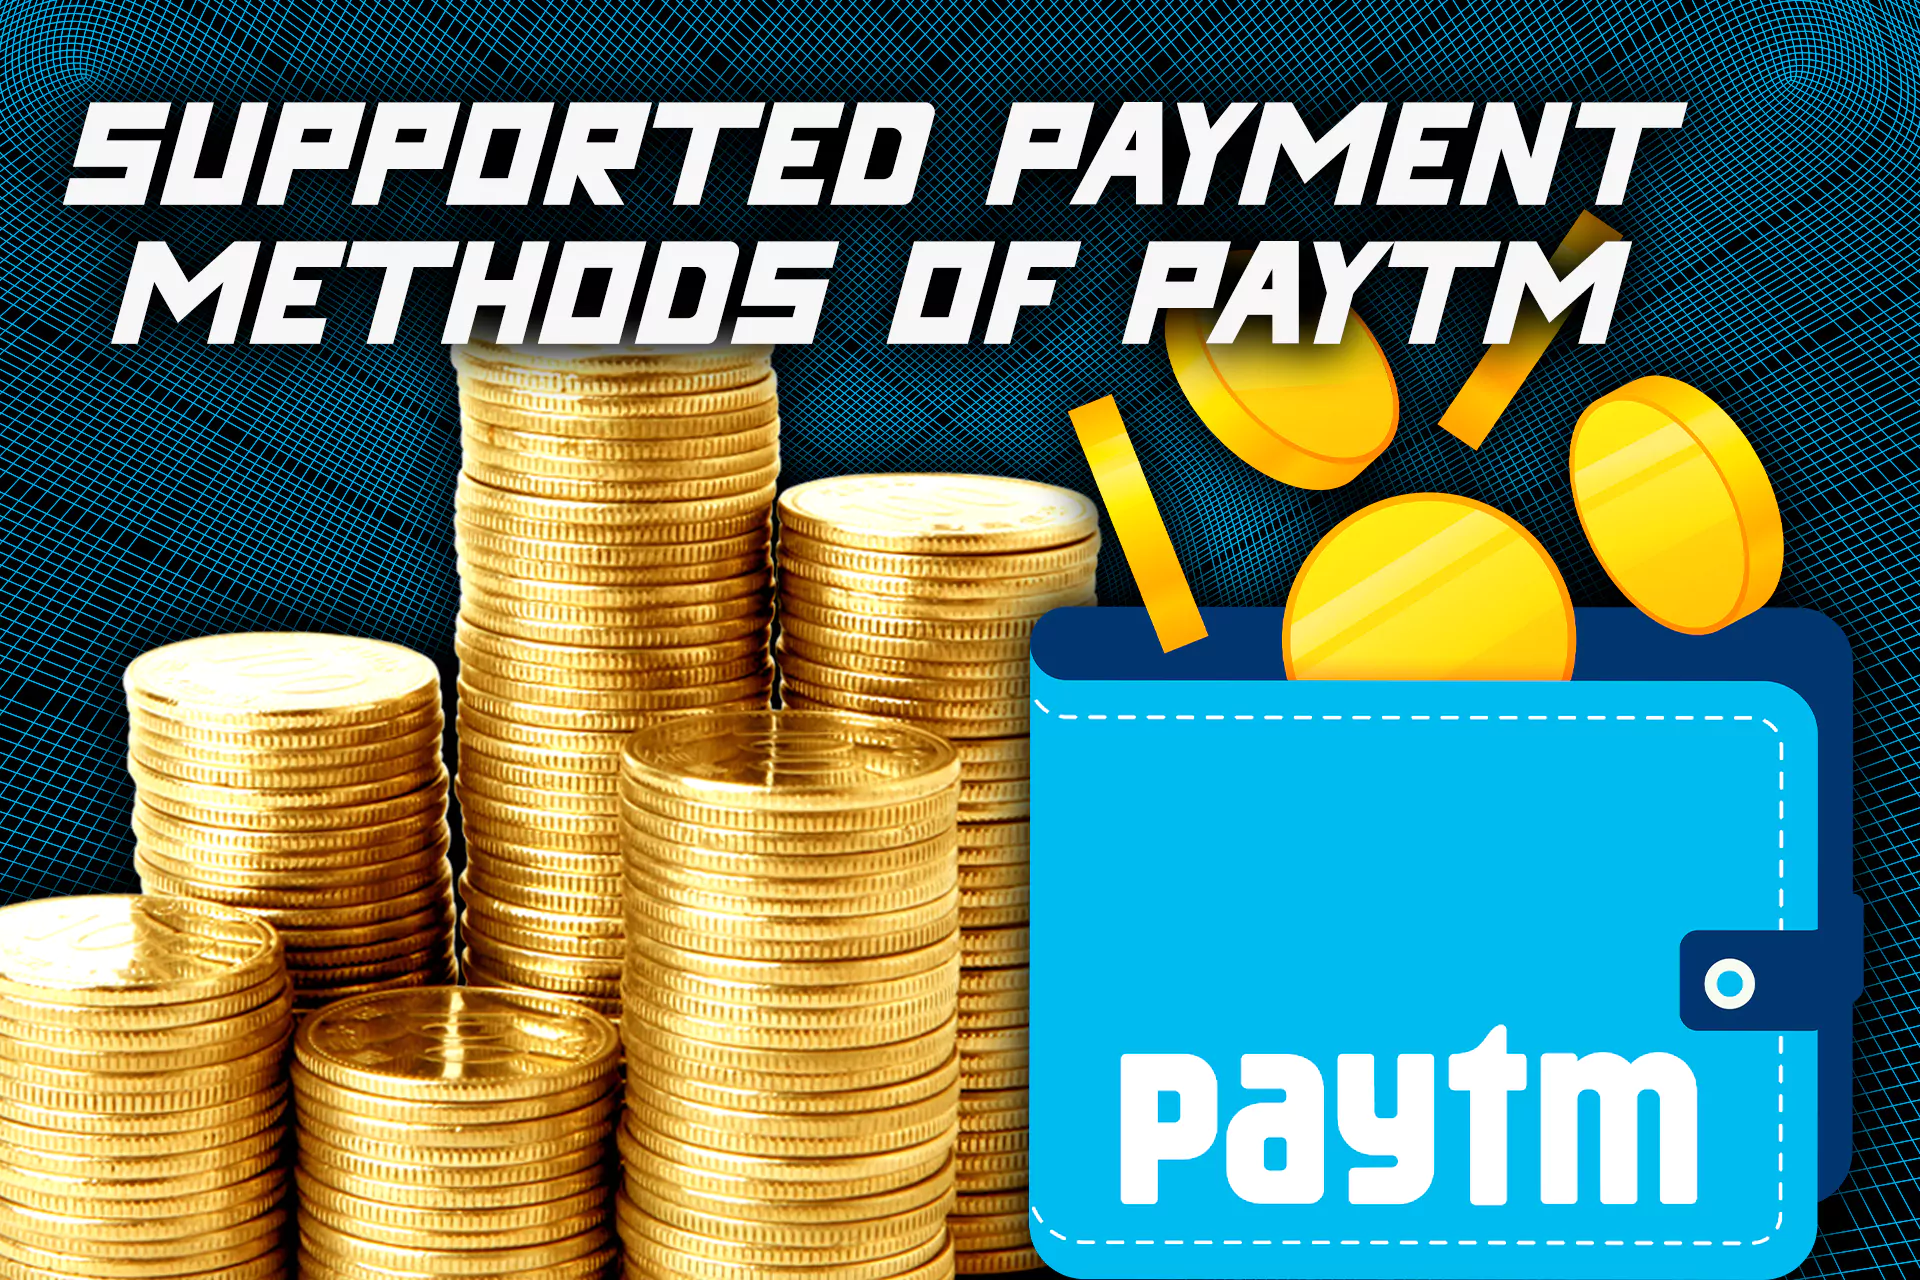 Paytm supports a lot of popular payment methods.